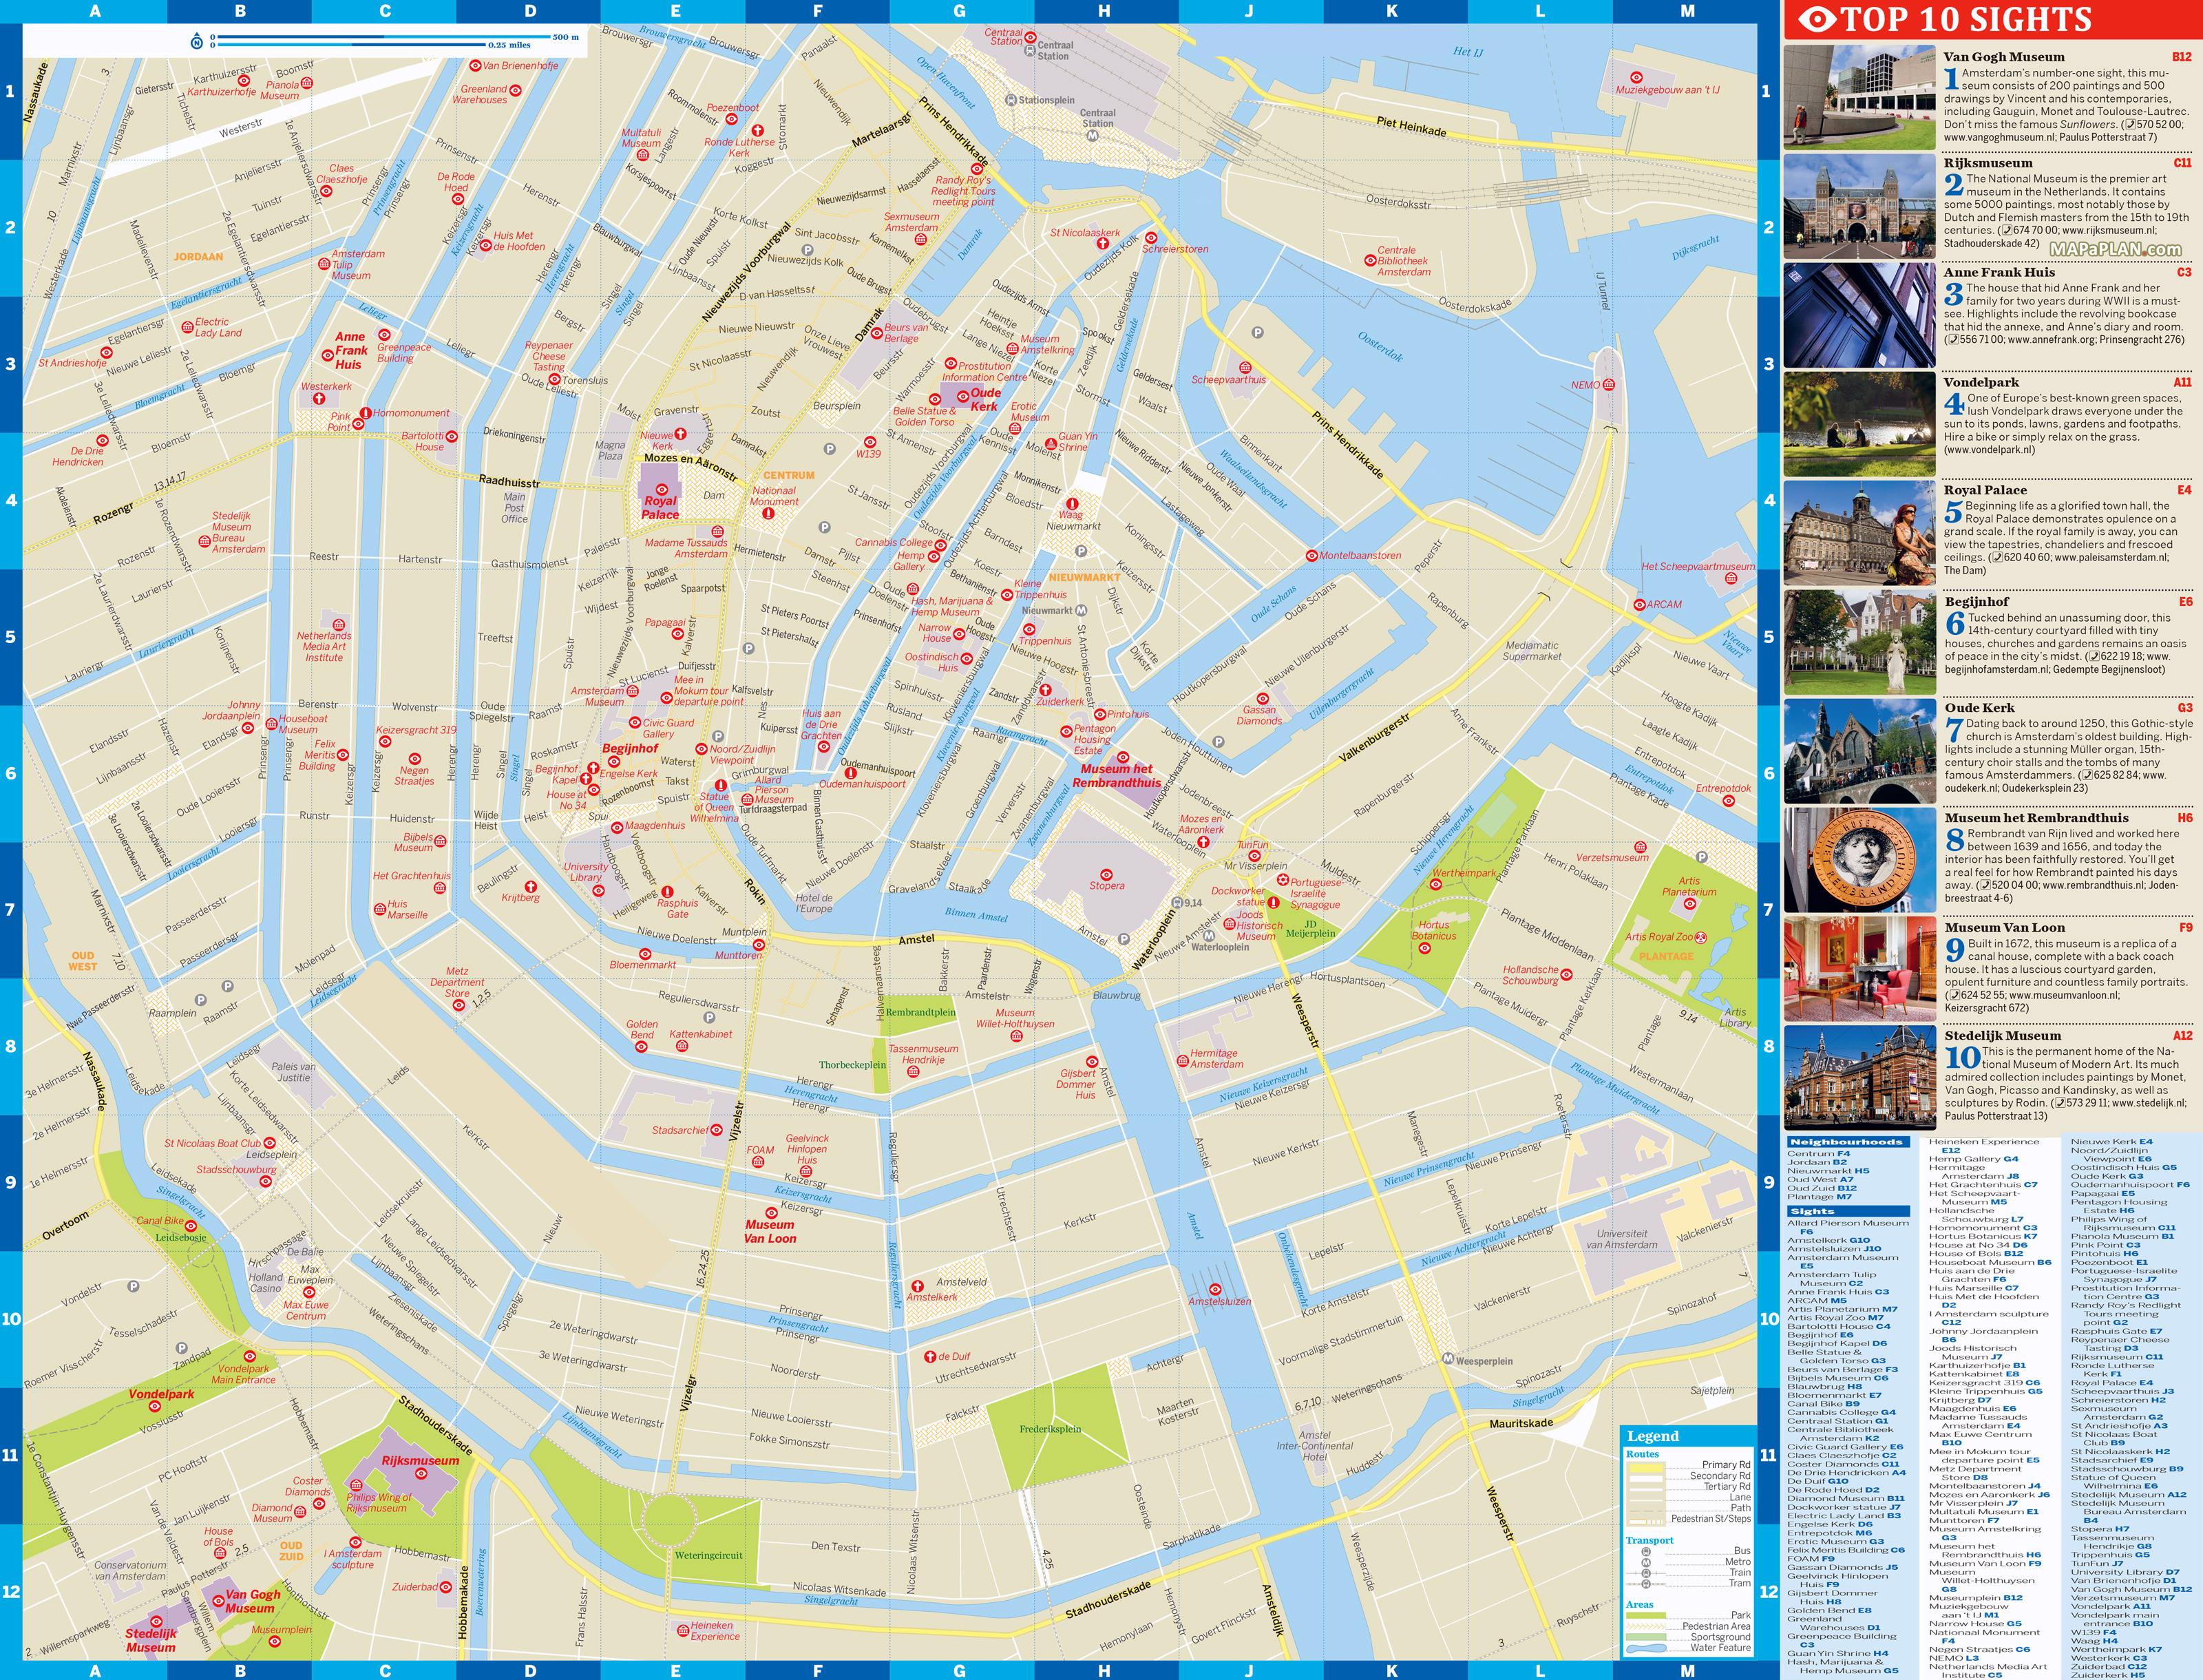 amsterdam-tourist-map-amsterdam-places-to-visit-map-netherlands